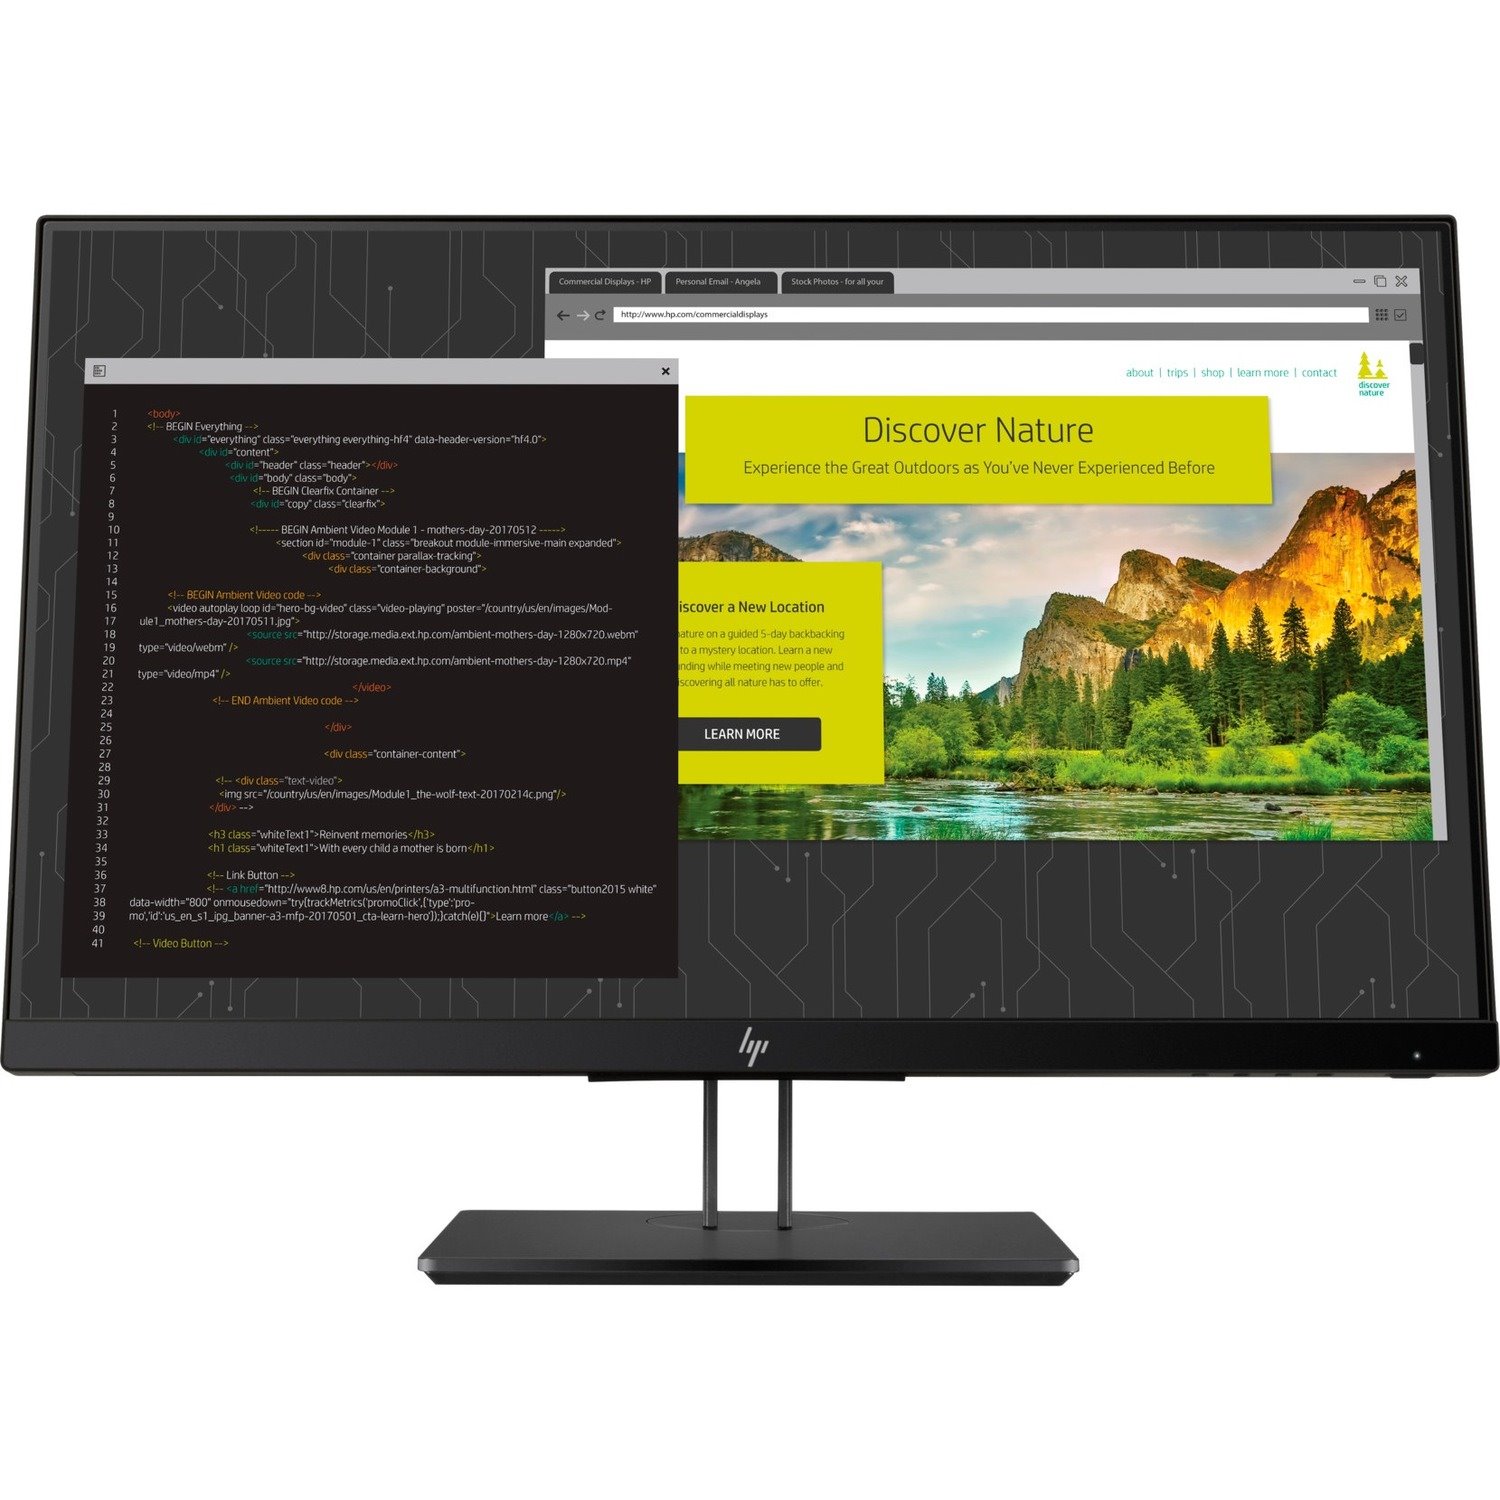 HP Business Z24nf G2 Full HD LCD Monitor - 16:9